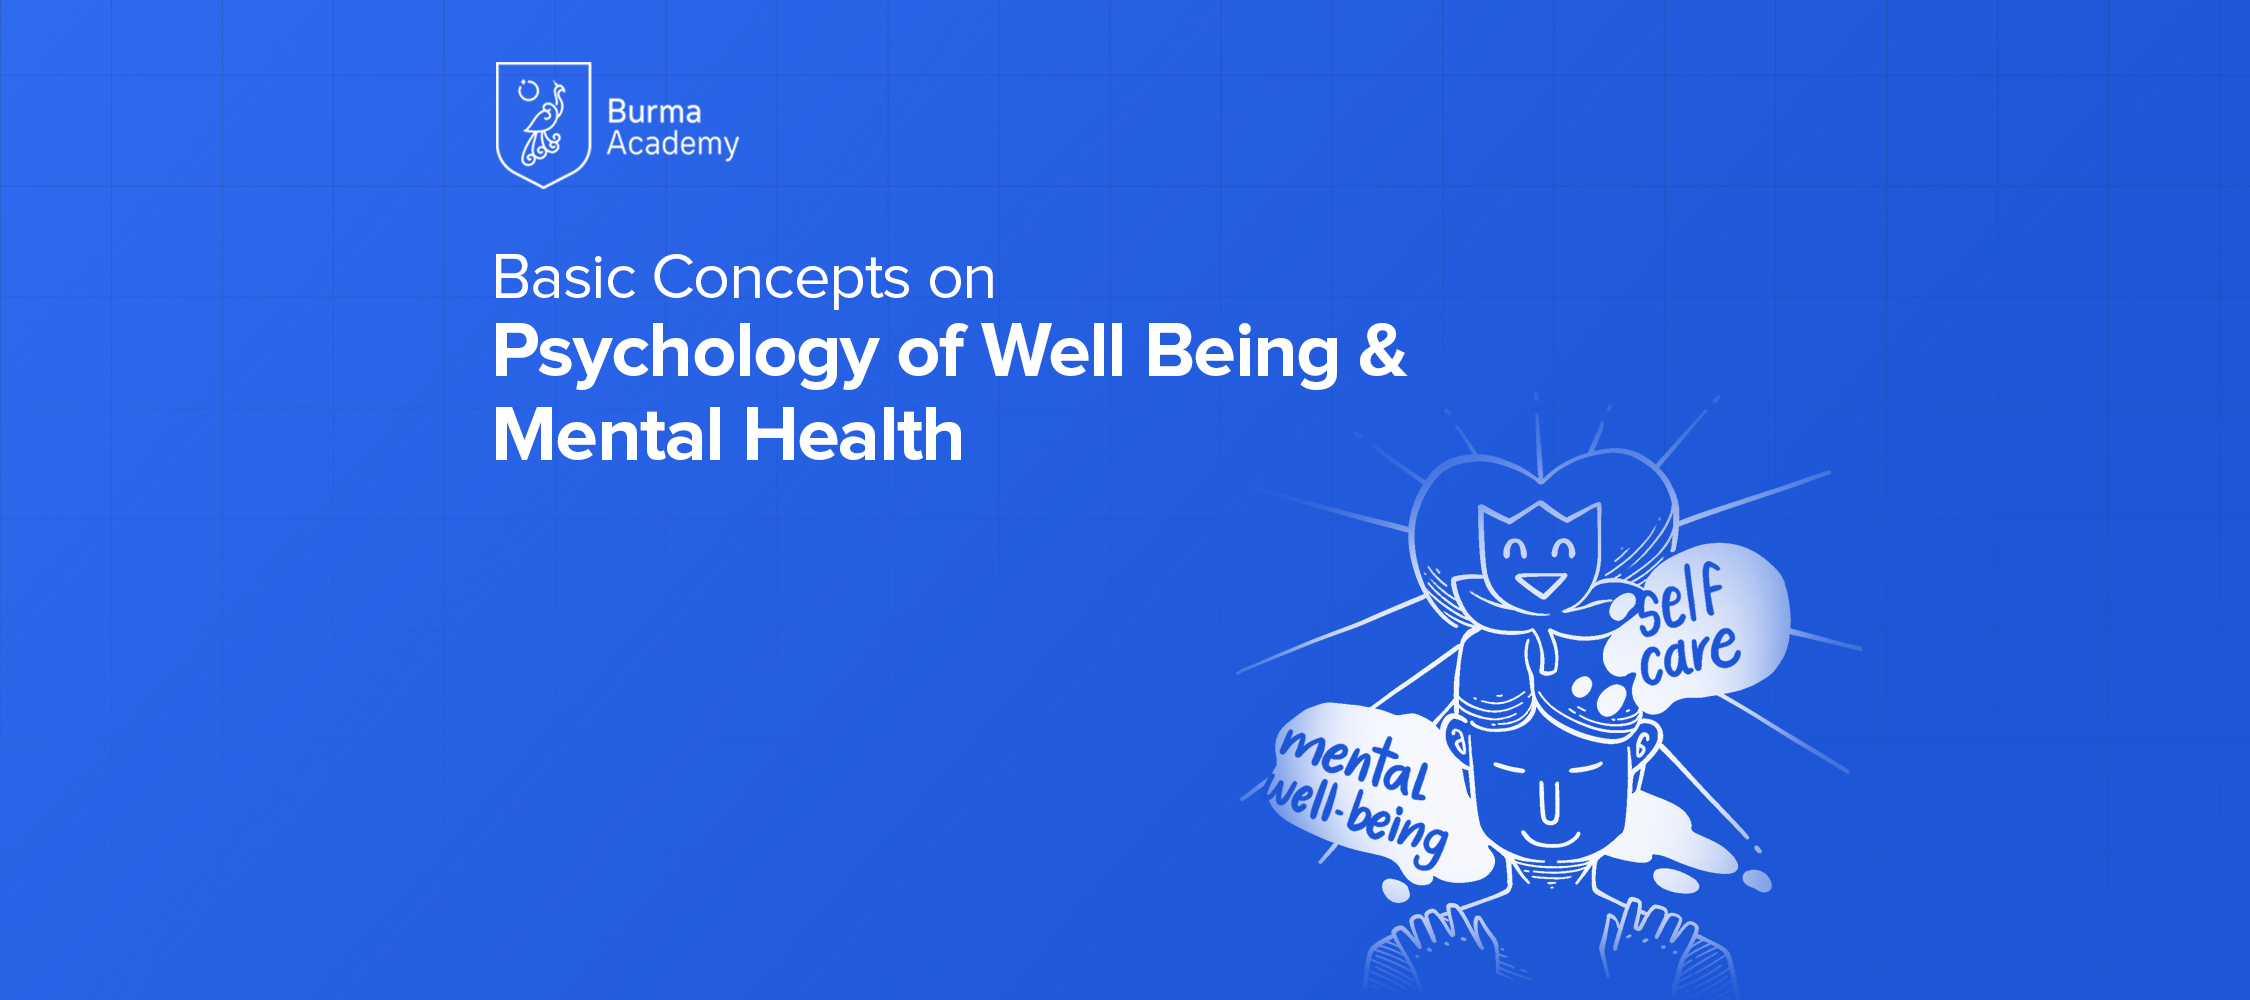 Basic concepts on psychology of well-being and mental health BA023